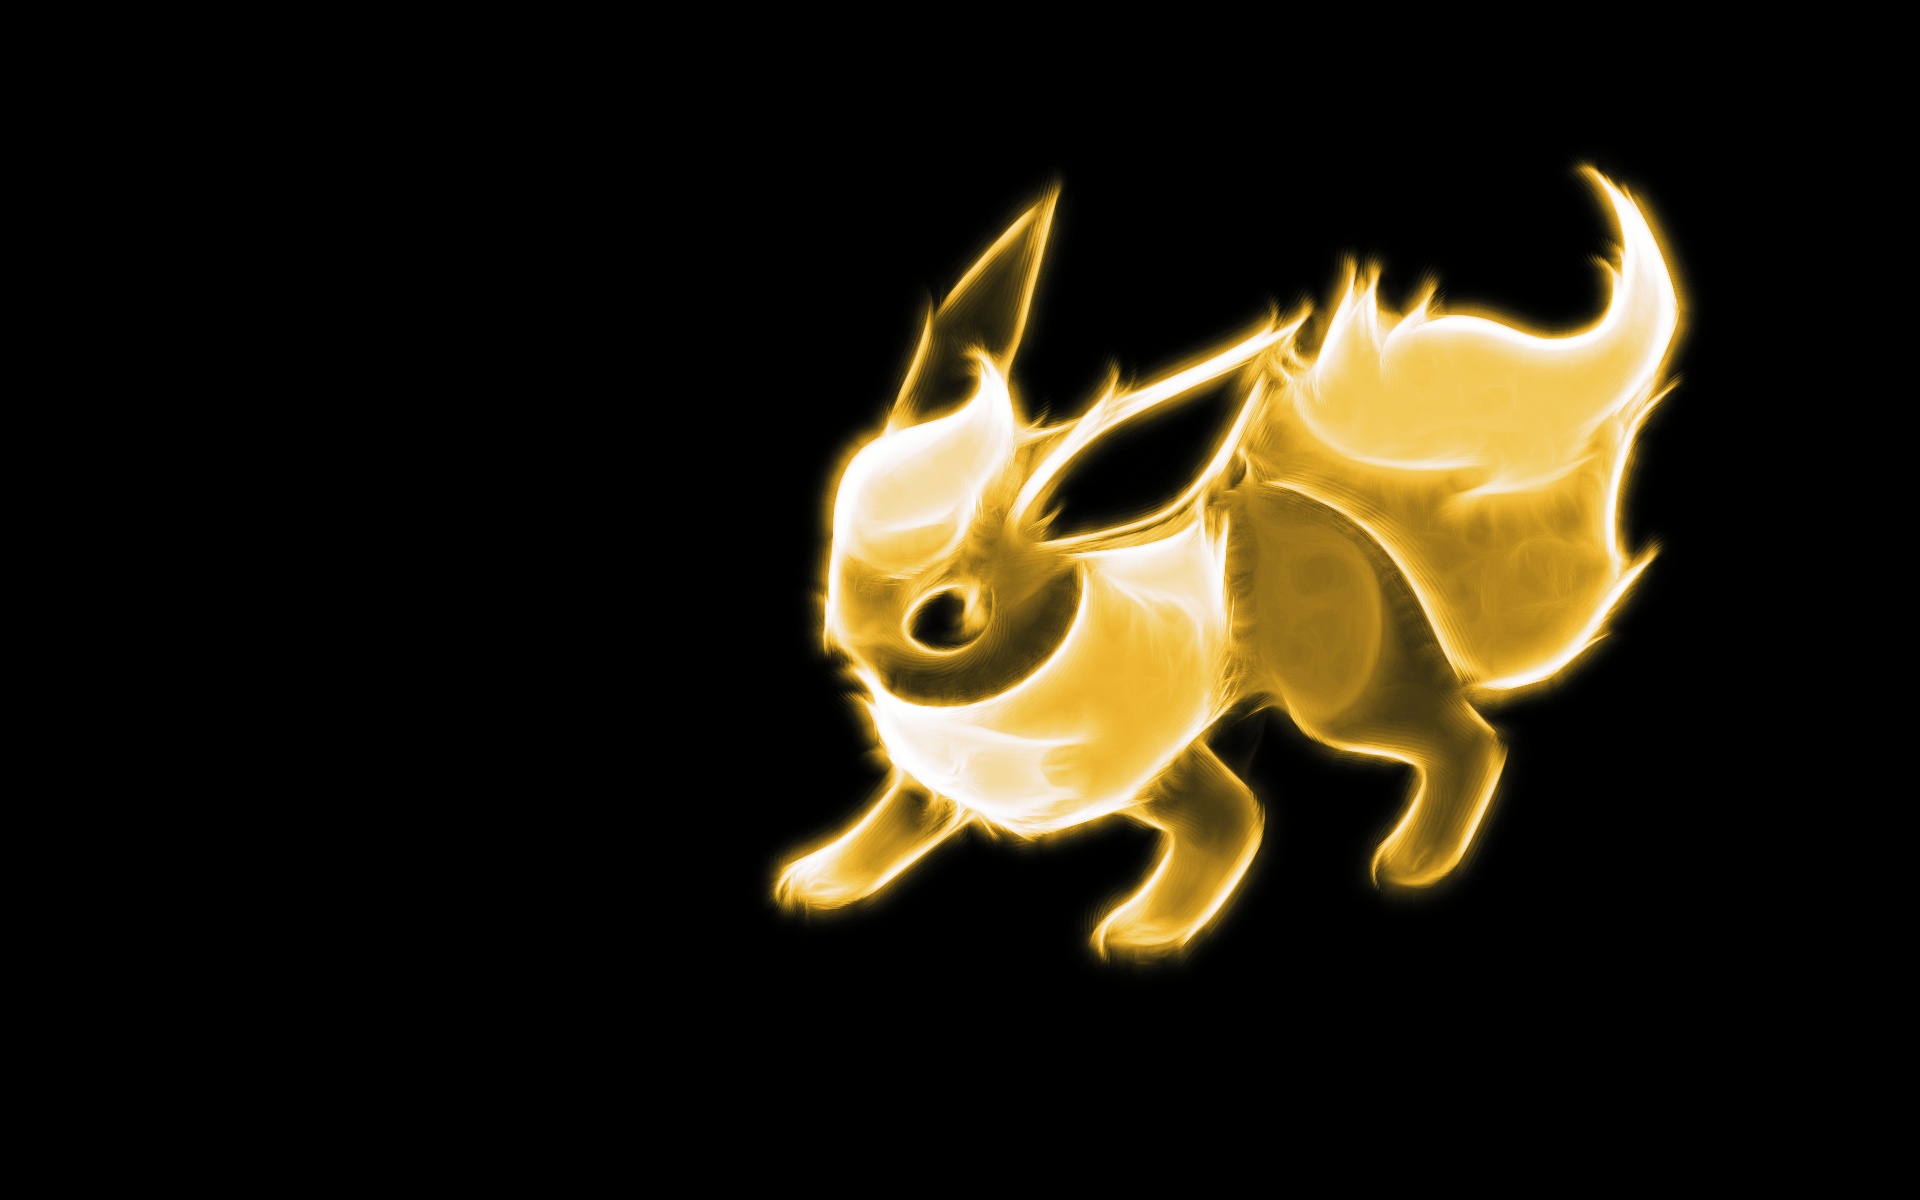 OC Flareon 1080p wallpaper shiny version in comments  rpokemon